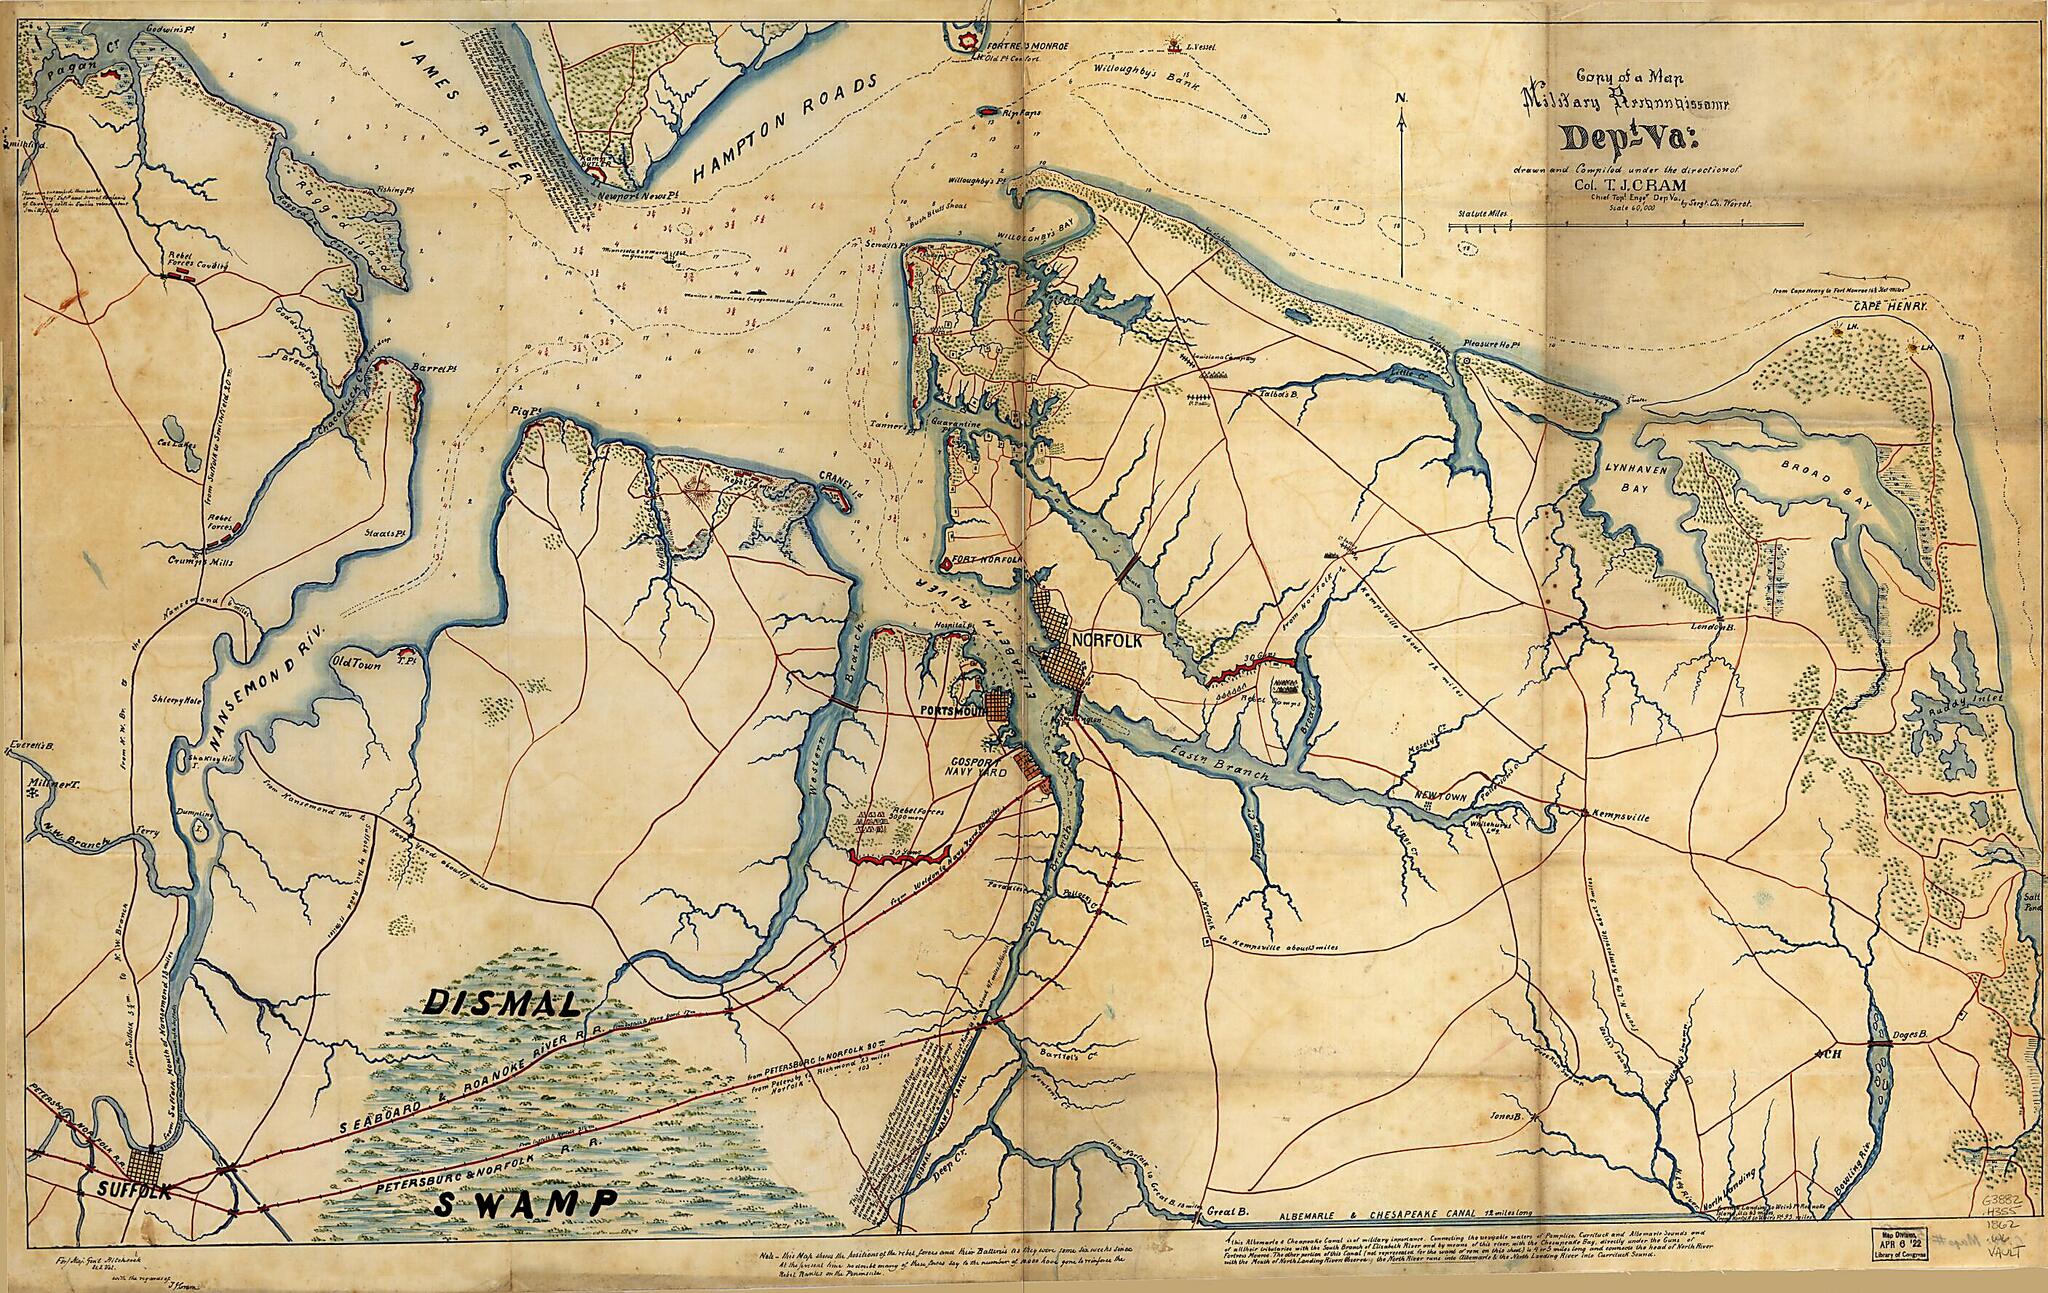 This old map of Copy of a Map Military Reconnaissance Dep&